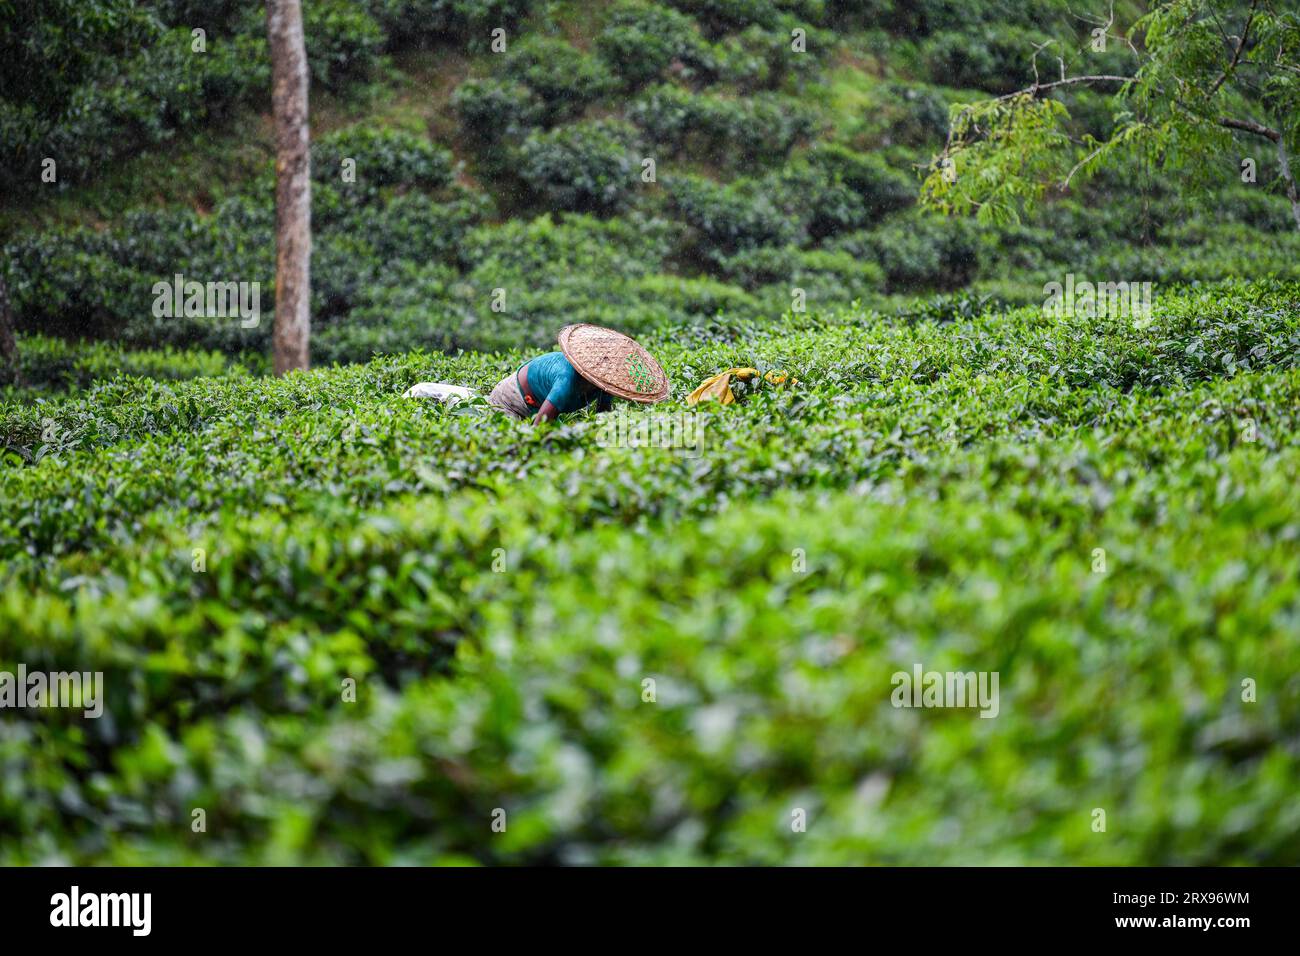 A Bangladeshi woman plucking tea leaves at a tea garden in Sylhet. Tea Plucking is a specialized skill. Two leaves and a bud need to be plucked in order to get the best taste and profitability. The calculation of daily wage is 170tk(1.60$) for plucking at least 22-23 kg leaves per day for a worker. The area of Sylhet has over 150 gardens including three of the largest tea gardens in the world both in area and production. Nearly 300,000 workers are employed on the tea estates of which over 75% are women but they are passing their lives as a slave. (Photo by Zabed Hasnain Chowdhury/SOPA Images Stock Photo